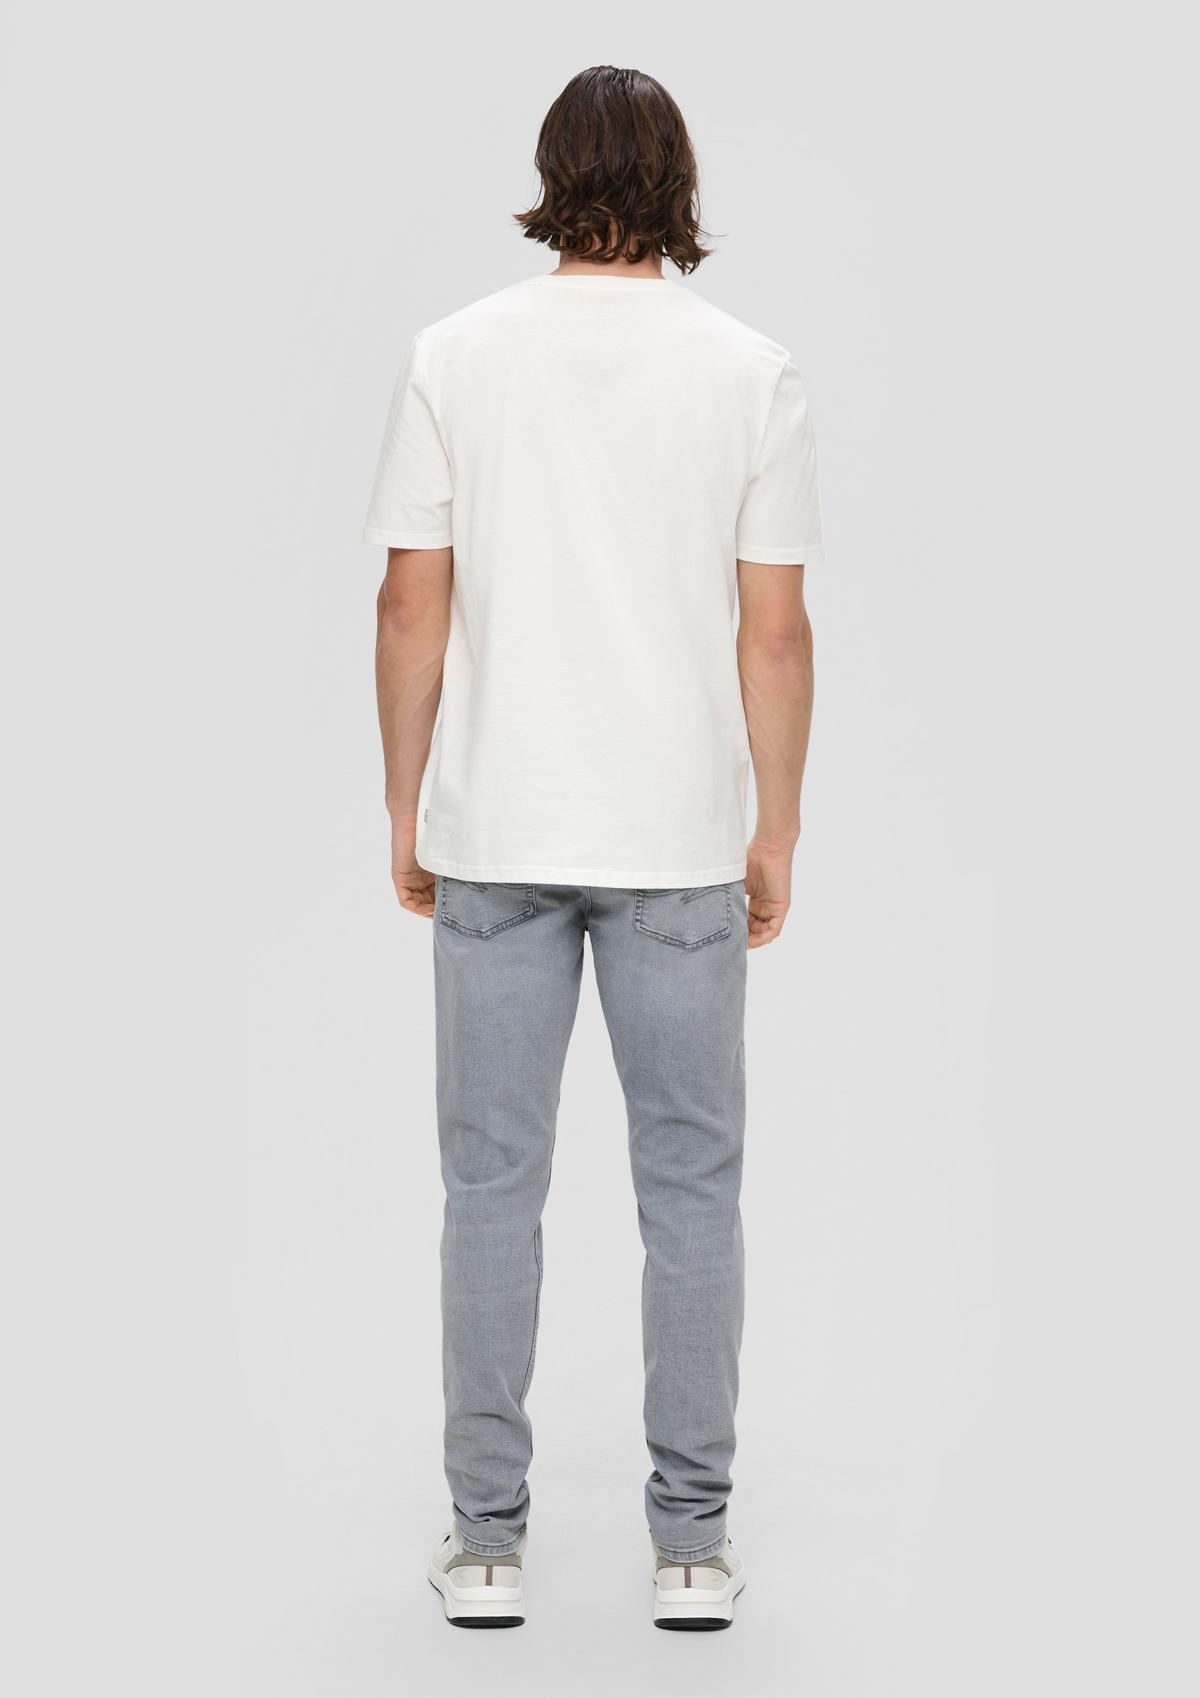 s.Oliver Shawn jeans / regular fit / mid rise / tapered leg